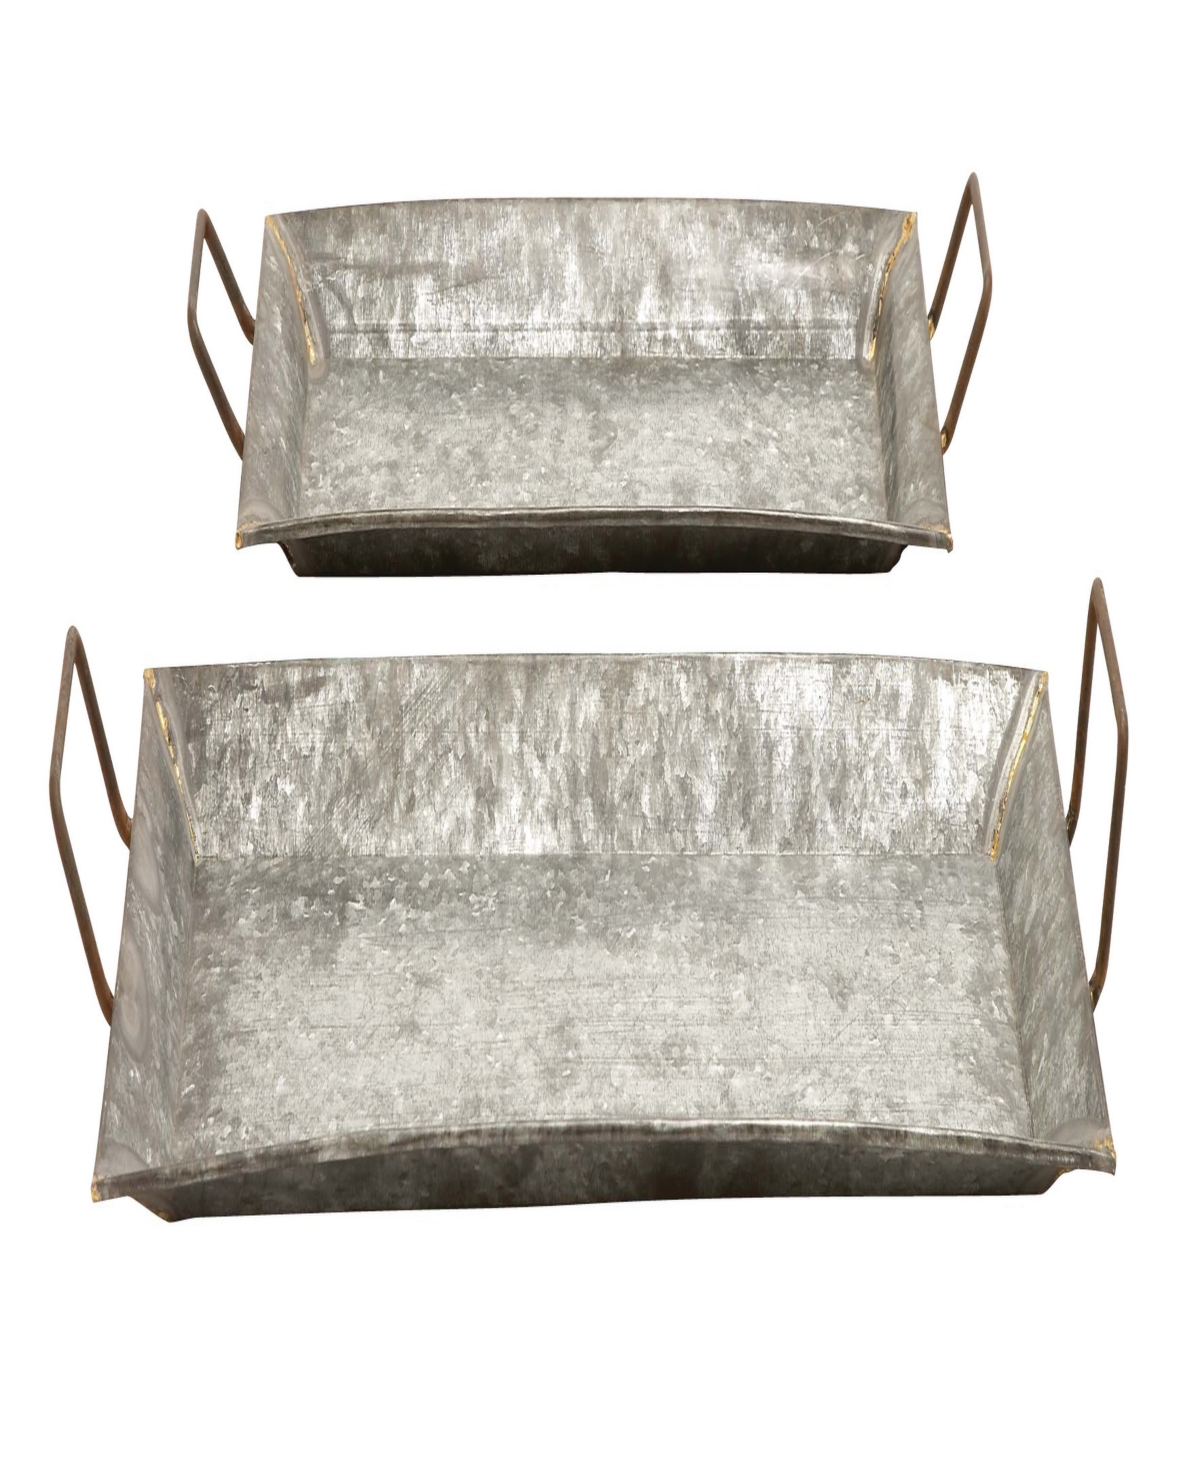 Rosemary Lane Metal Floral Tray With Embossed Designs, Set Of 2, 29", 25" W In Gray